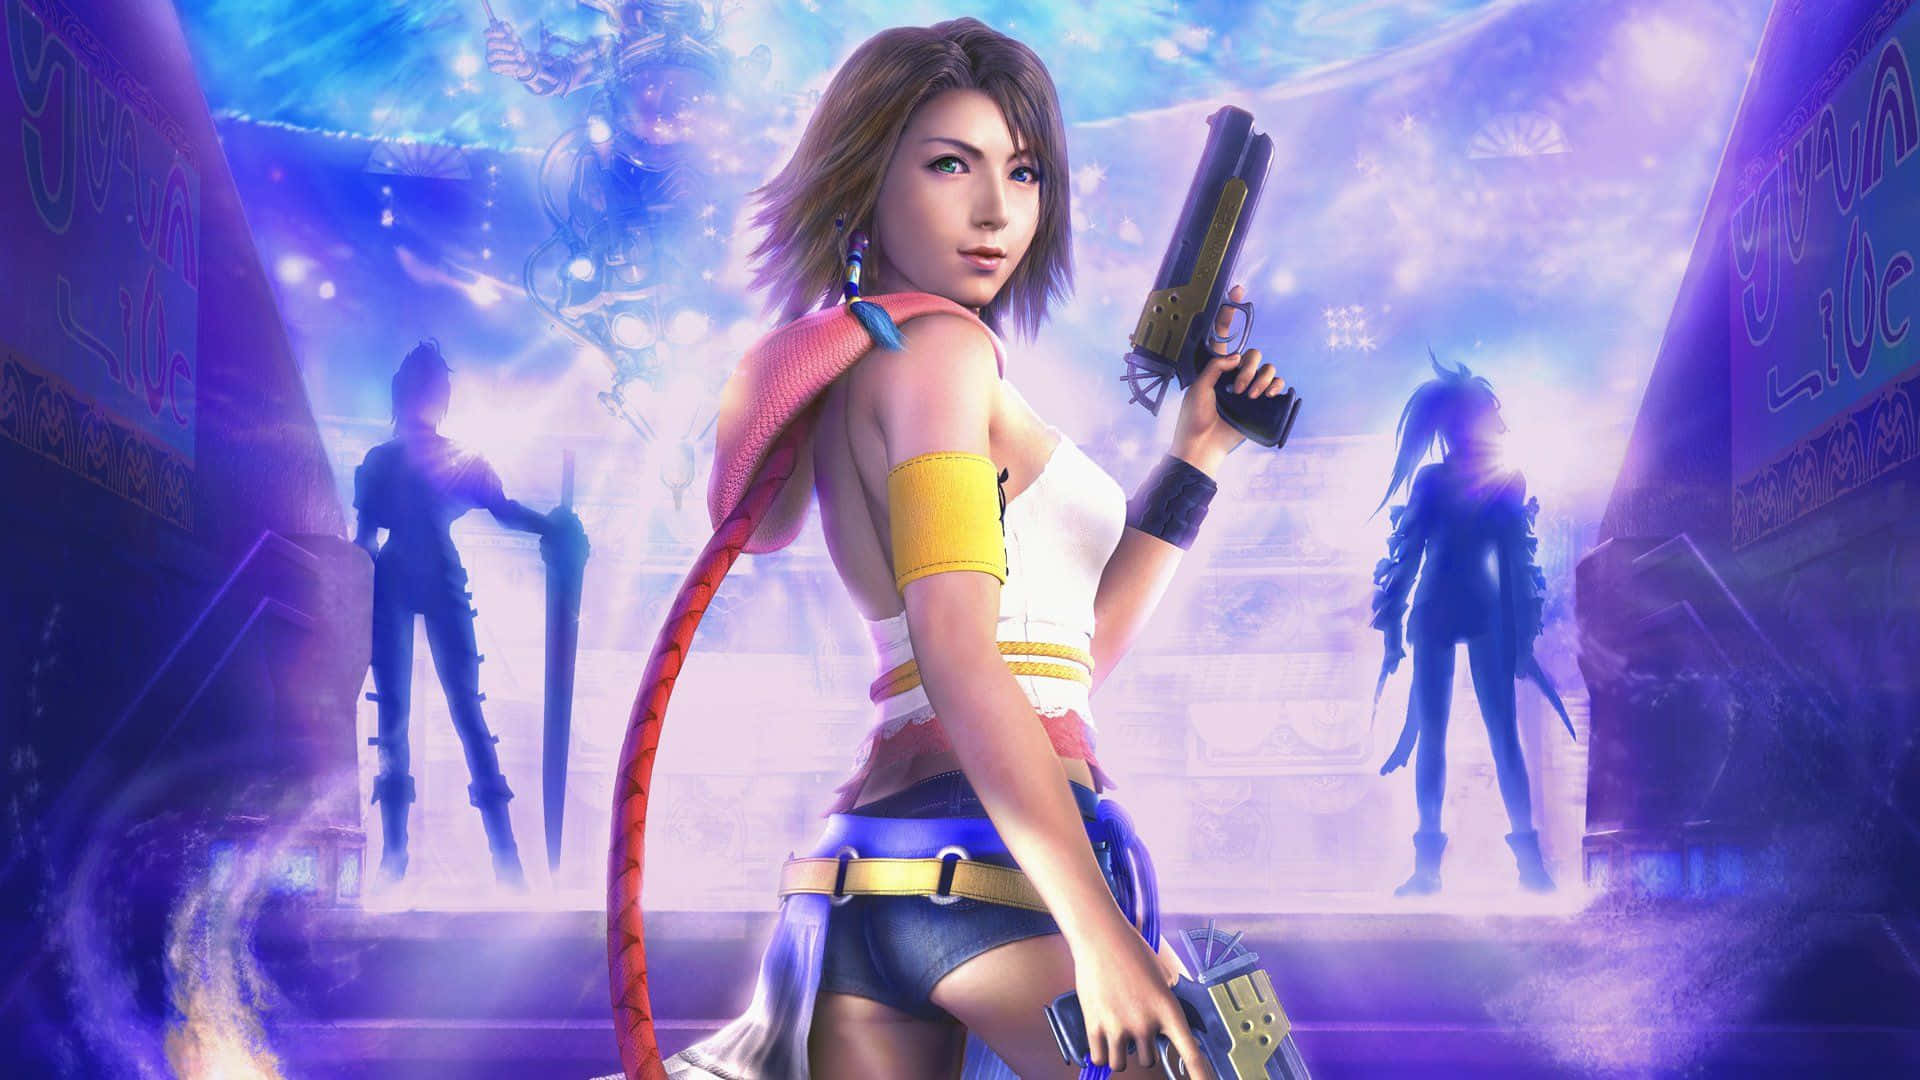 Protagonist Tidus Staring Into The Distance In The World Of Final Fantasy X Wallpaper